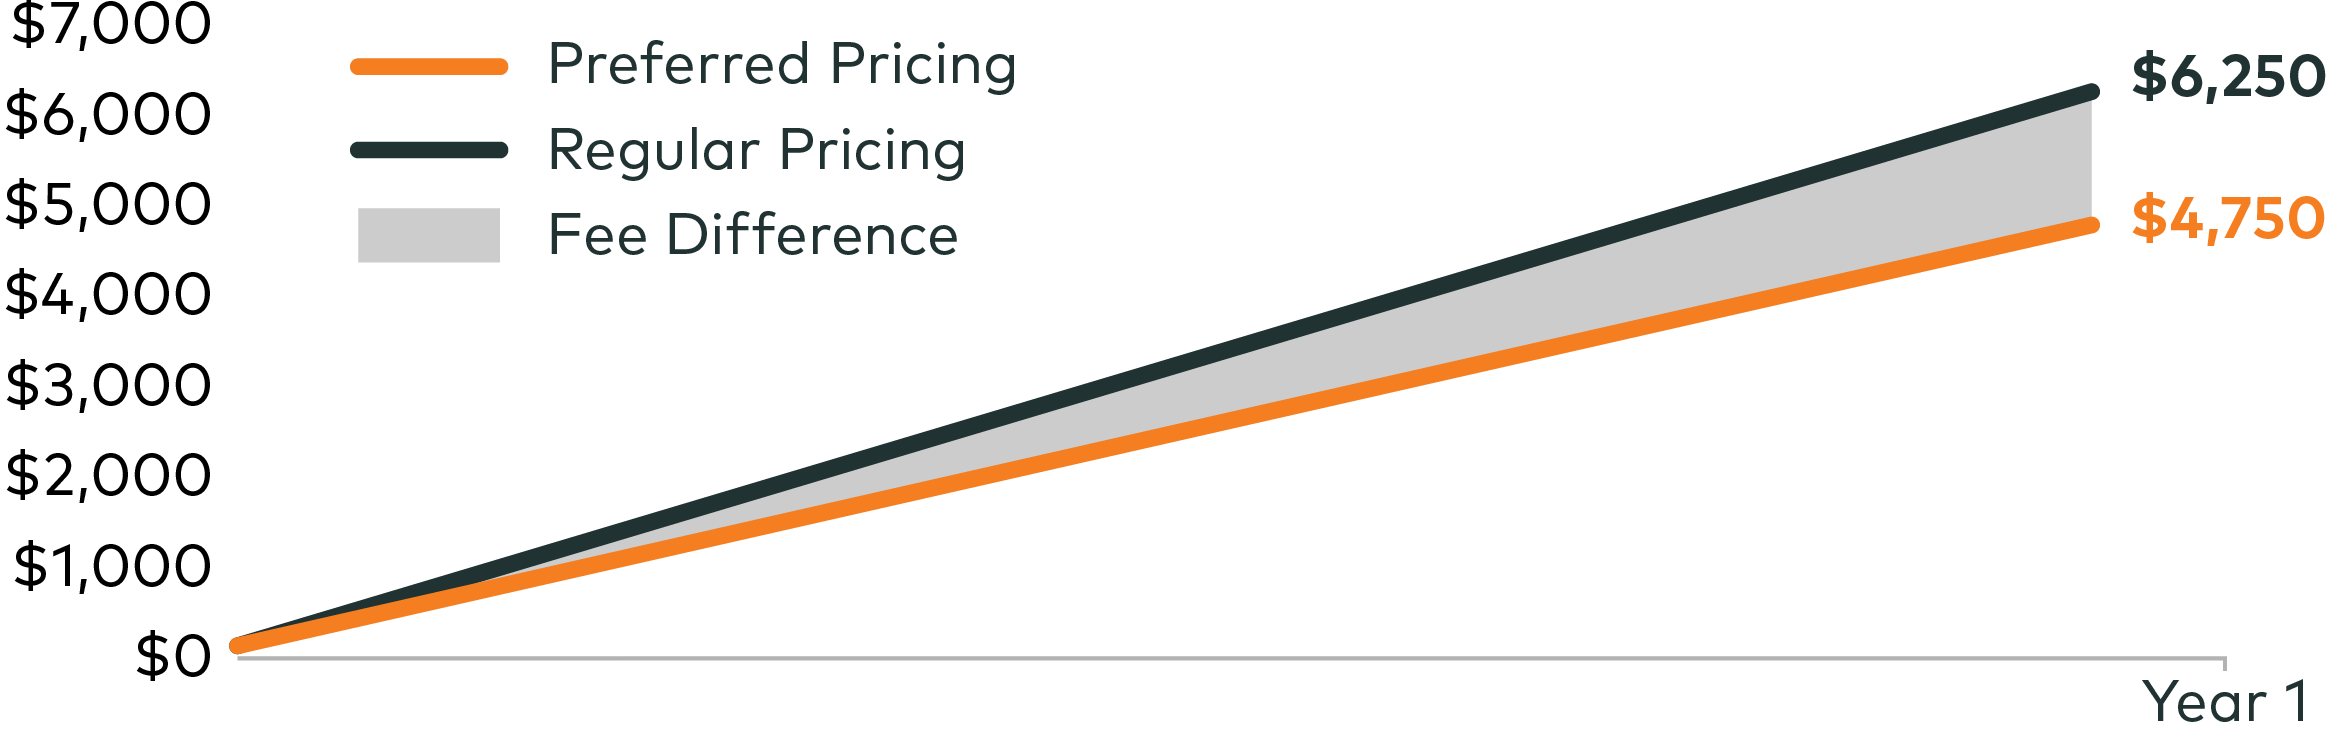 This chart illustrates the potential benefits that preferred pricing can offer.